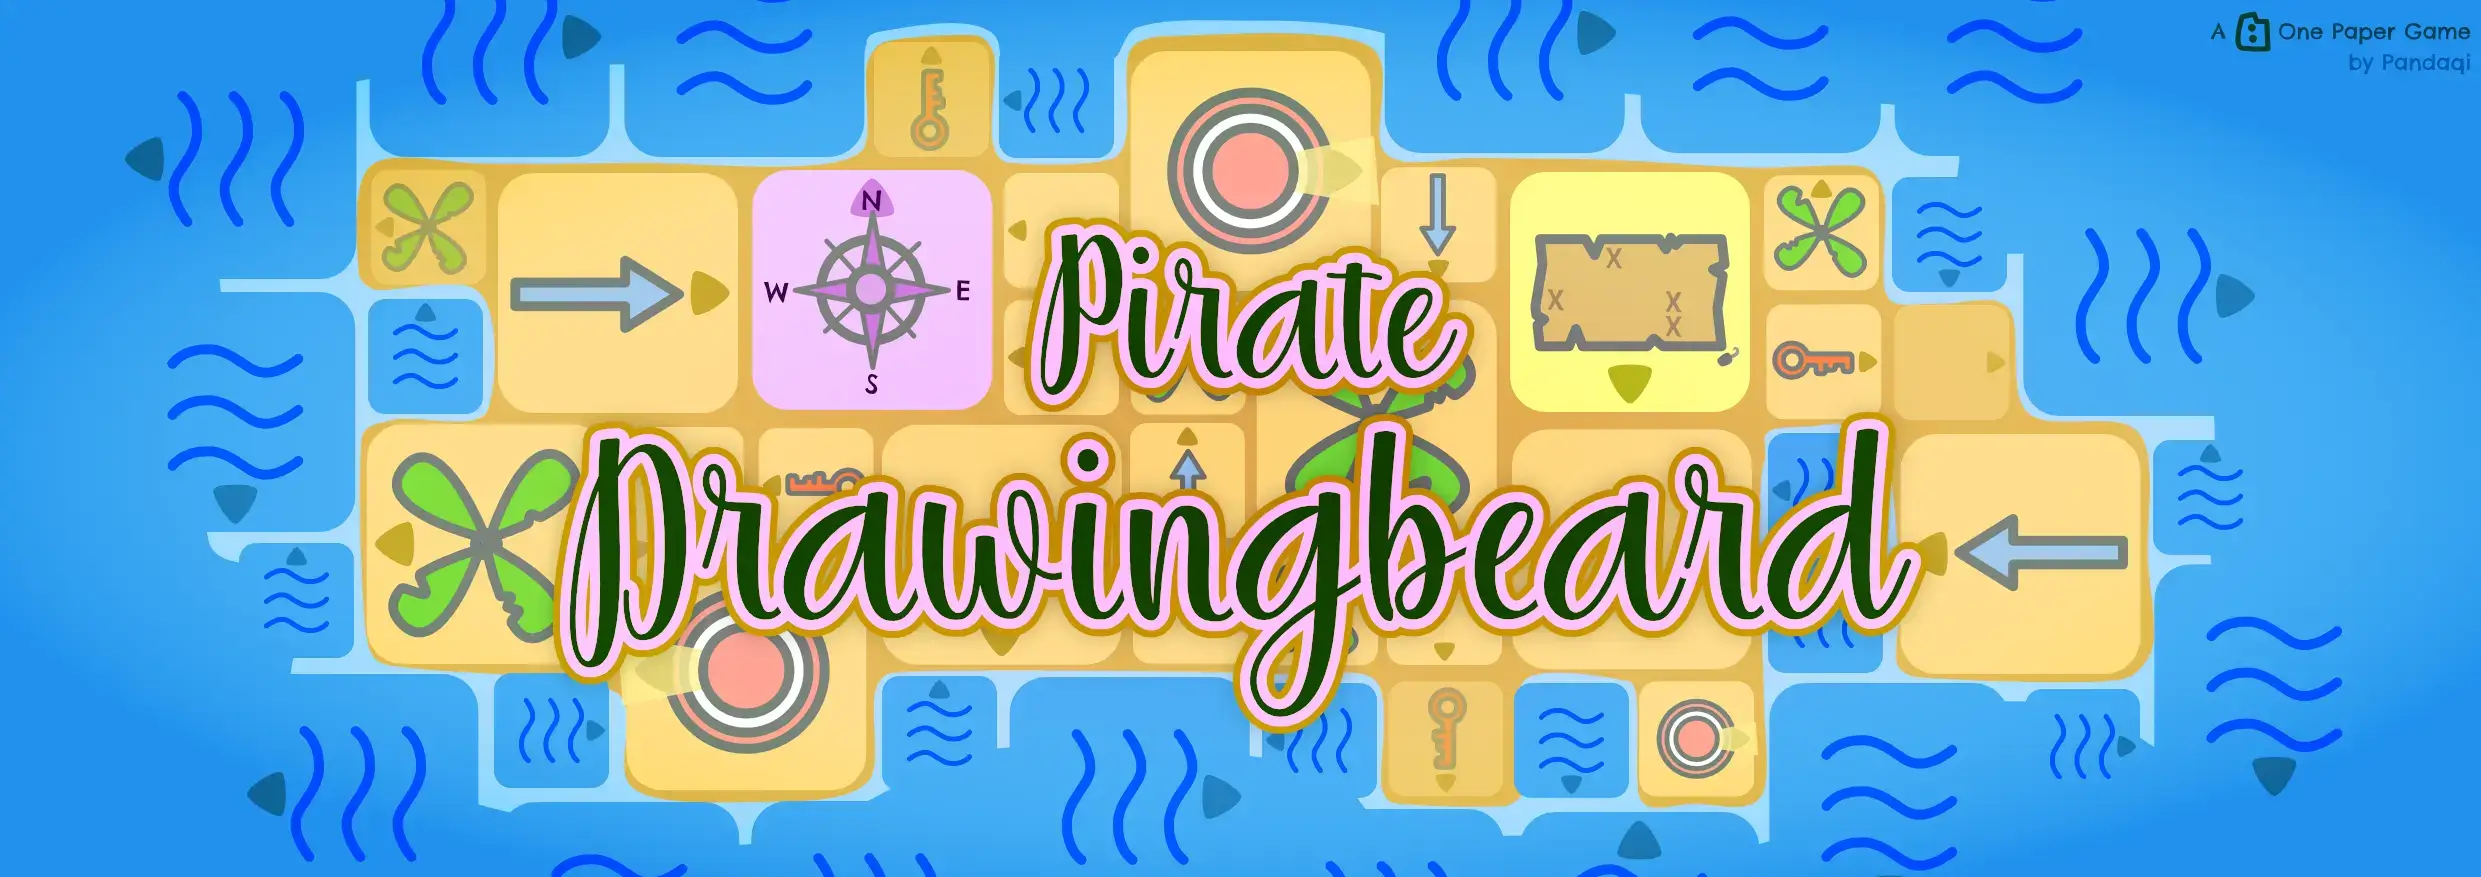 Header / Cover Image for 'Pirate Drawingbeard'